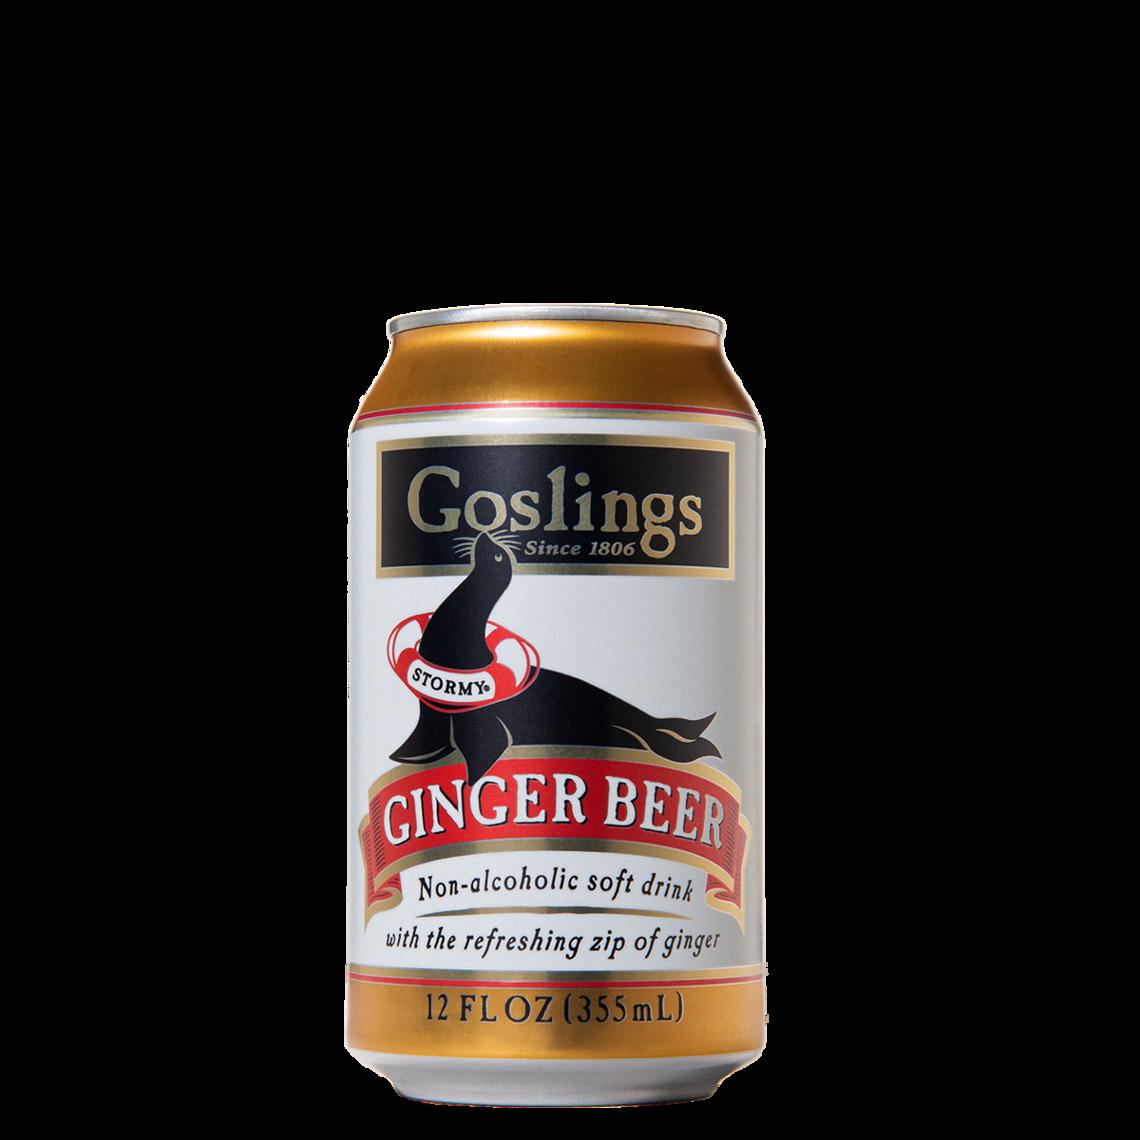 is goslings ginger beer alcoholic